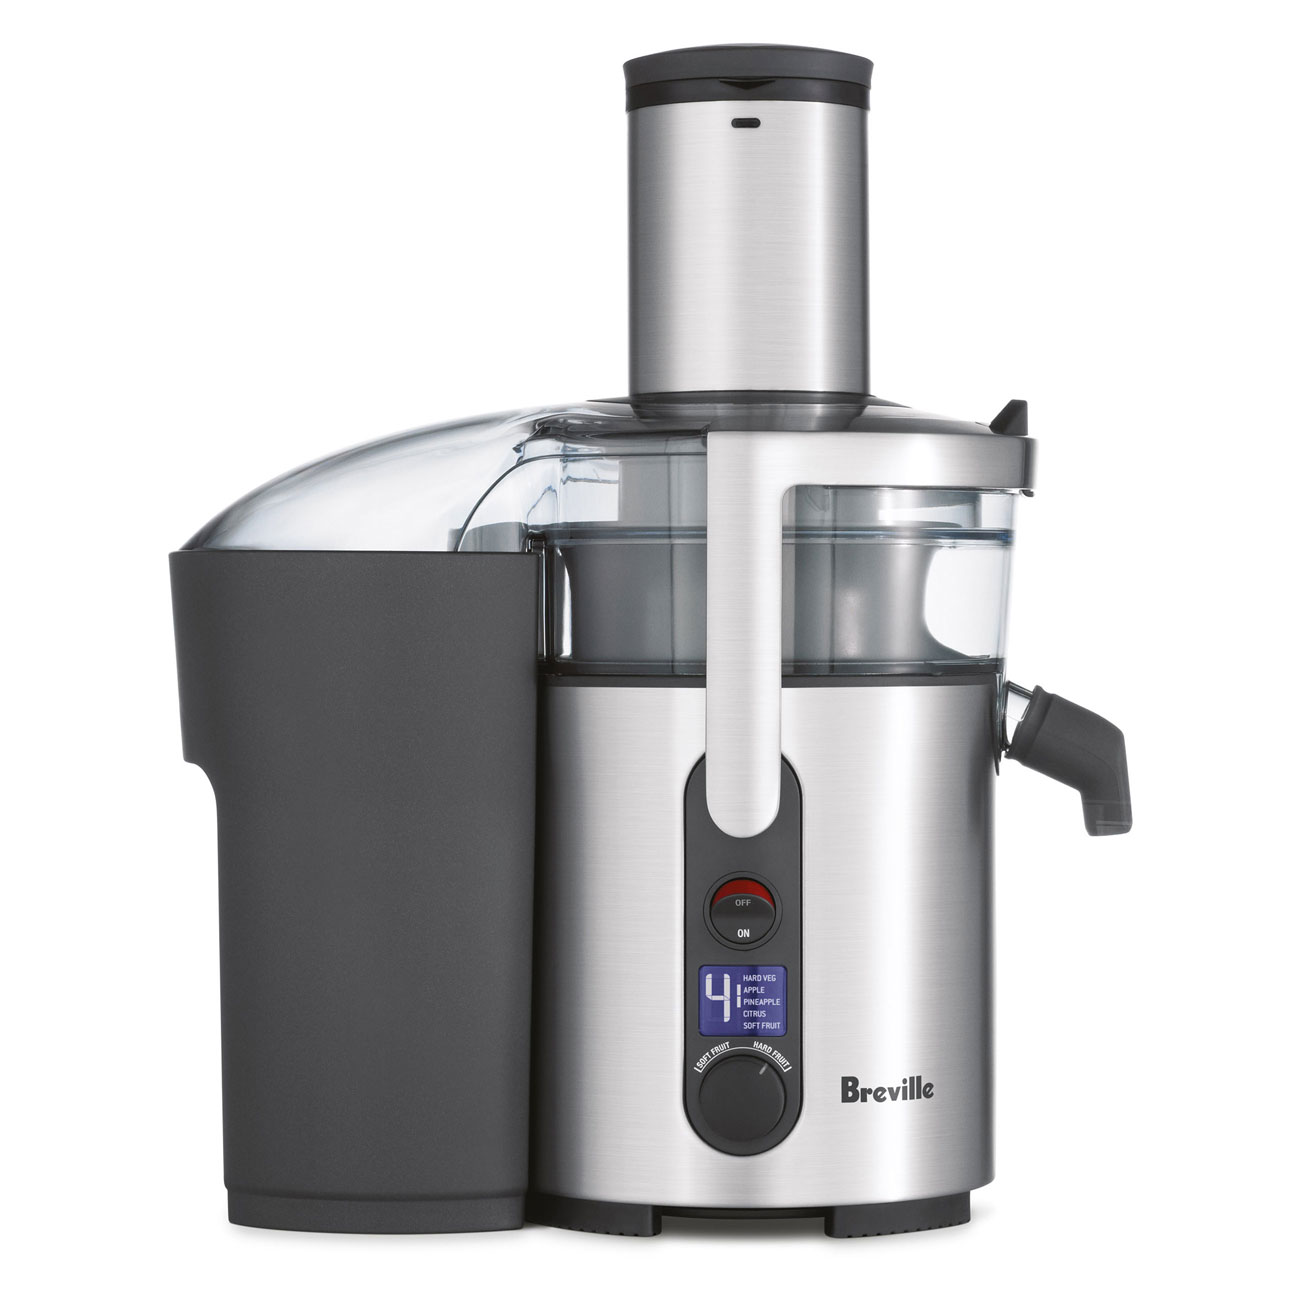 How To Clean Breville Juicer? 